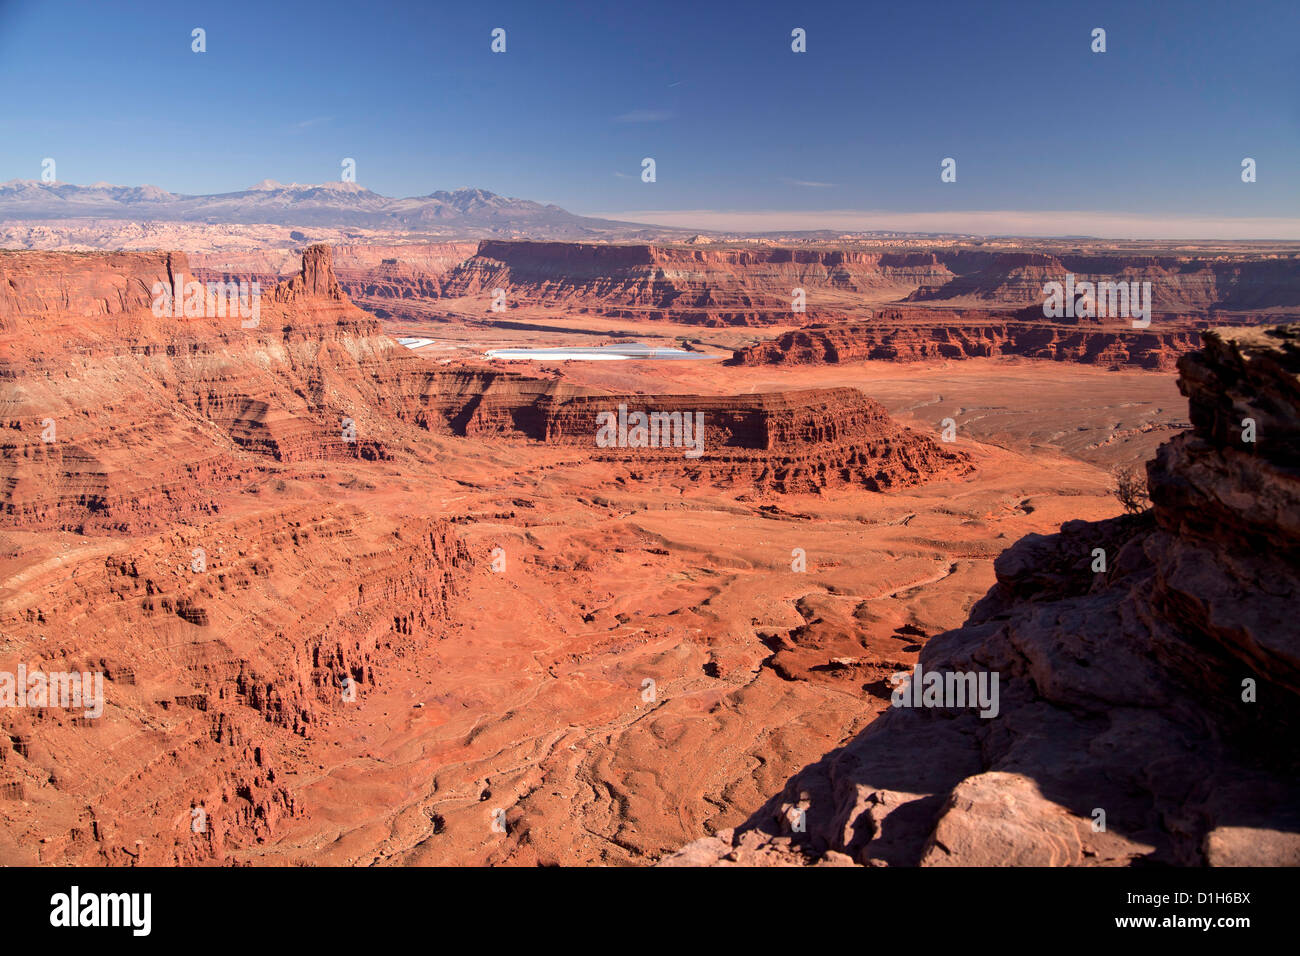 Dead Horse Point Overlook at Dead Horse Point State Park, Moab, Utah, United States of America, USA Stock Photo